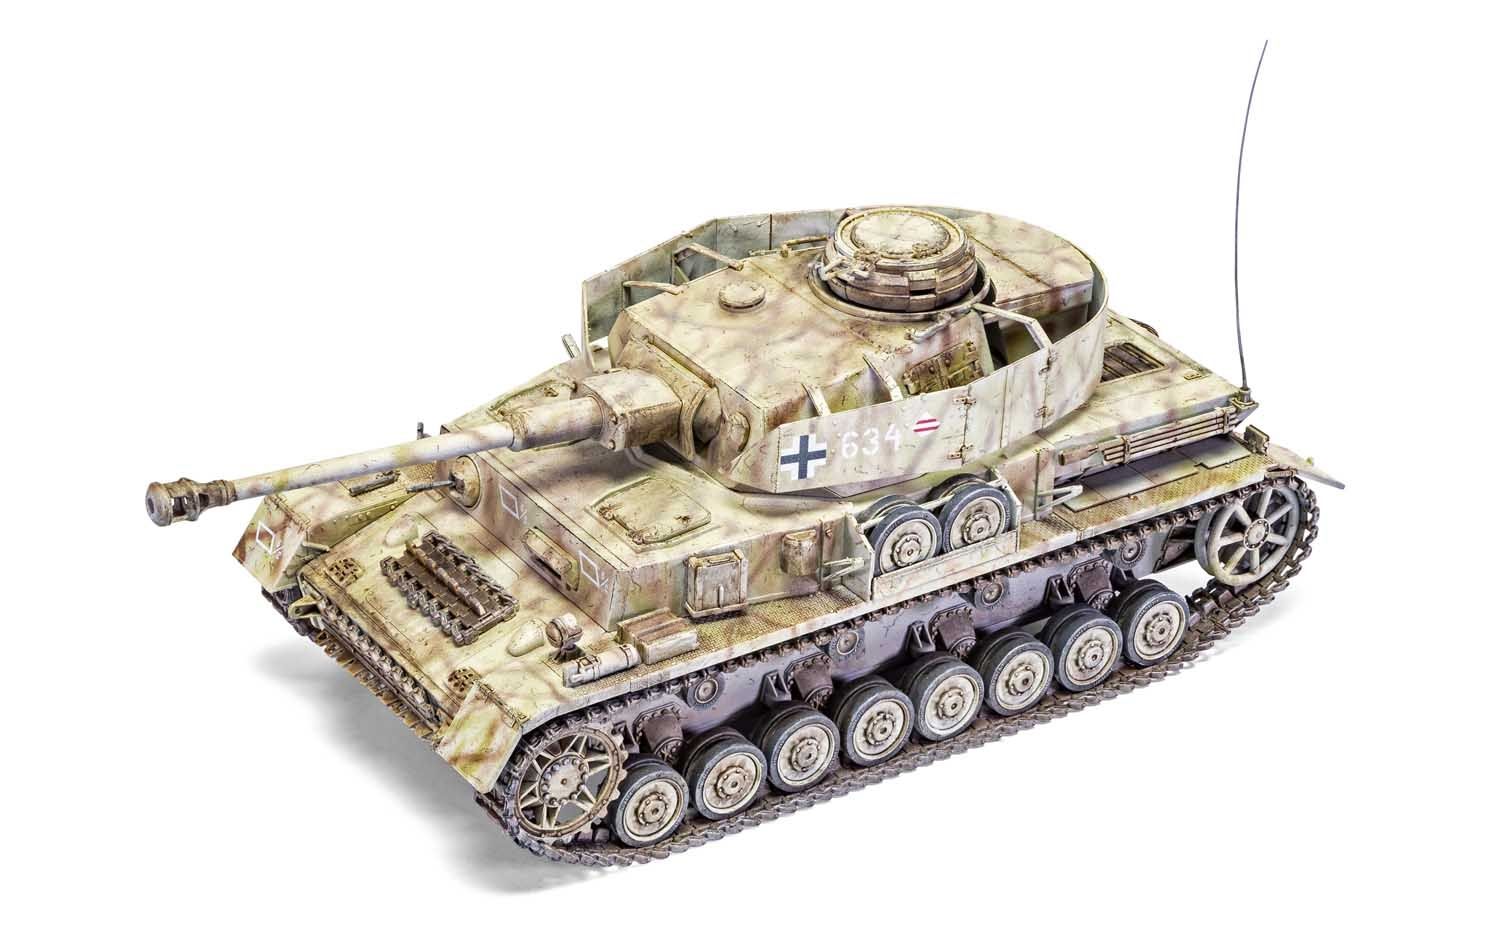 Panzer IV Ausf H Mid Version (1:35) - Loaded Dice Barry Vale of Glamorgan CF64 3HD